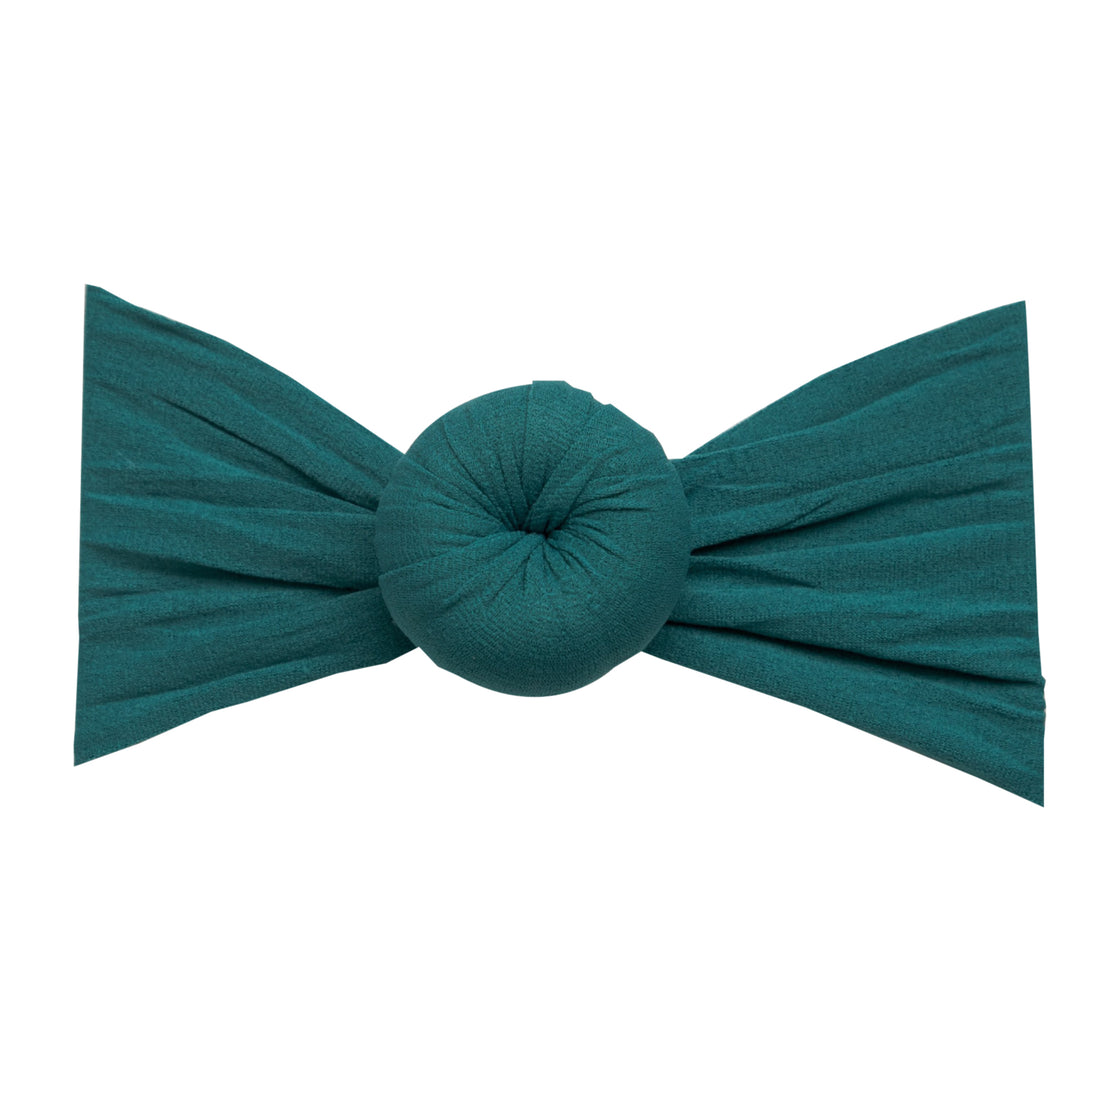 Round Knot Turban - Other Colors